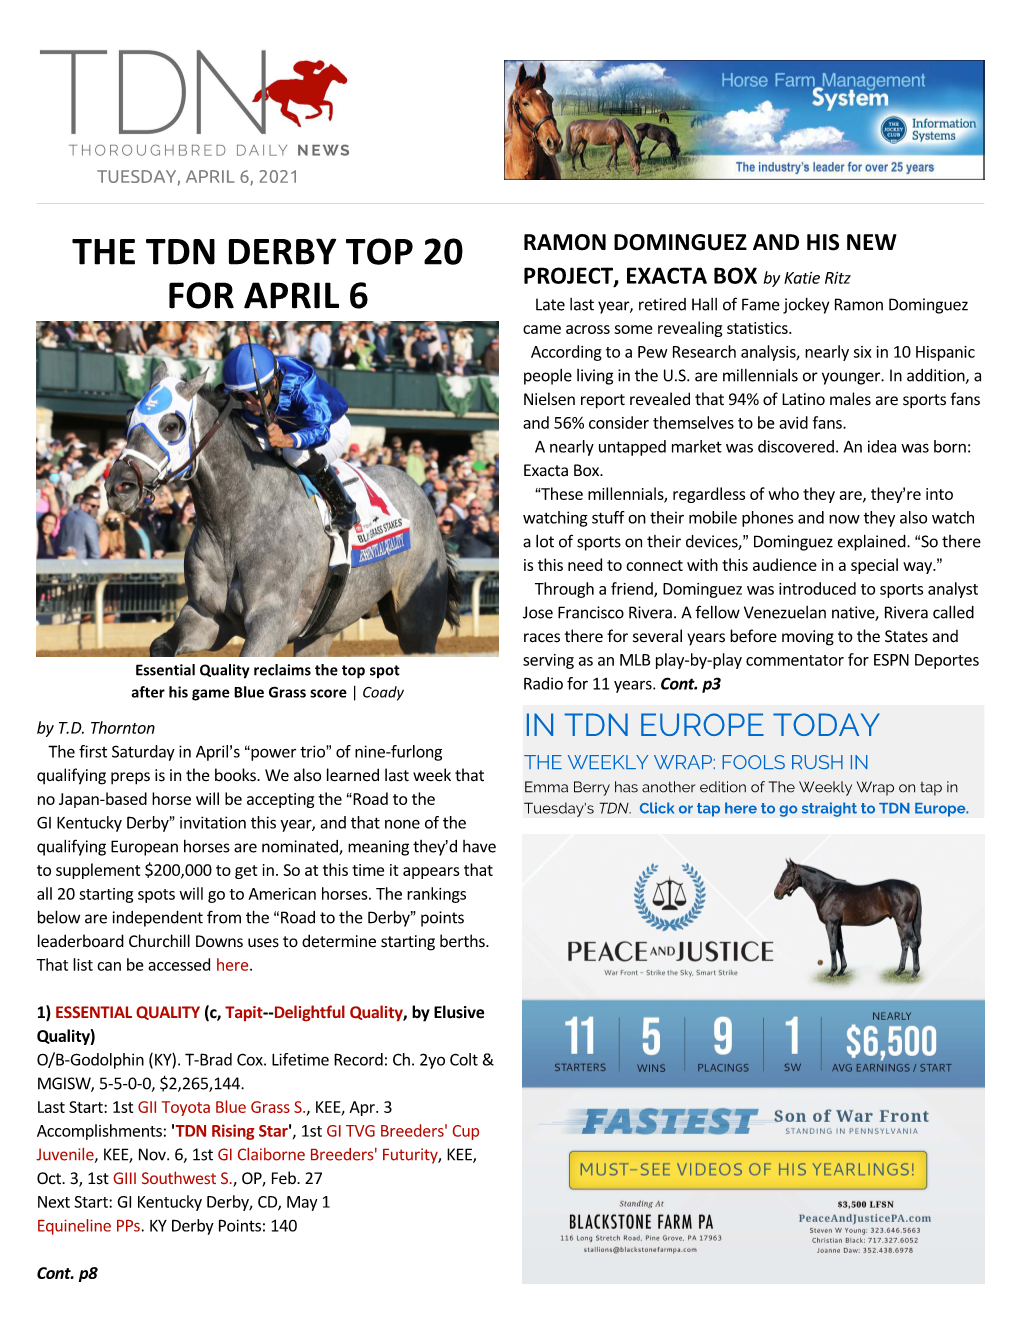 The Tdn Derby Top 20 for April 6